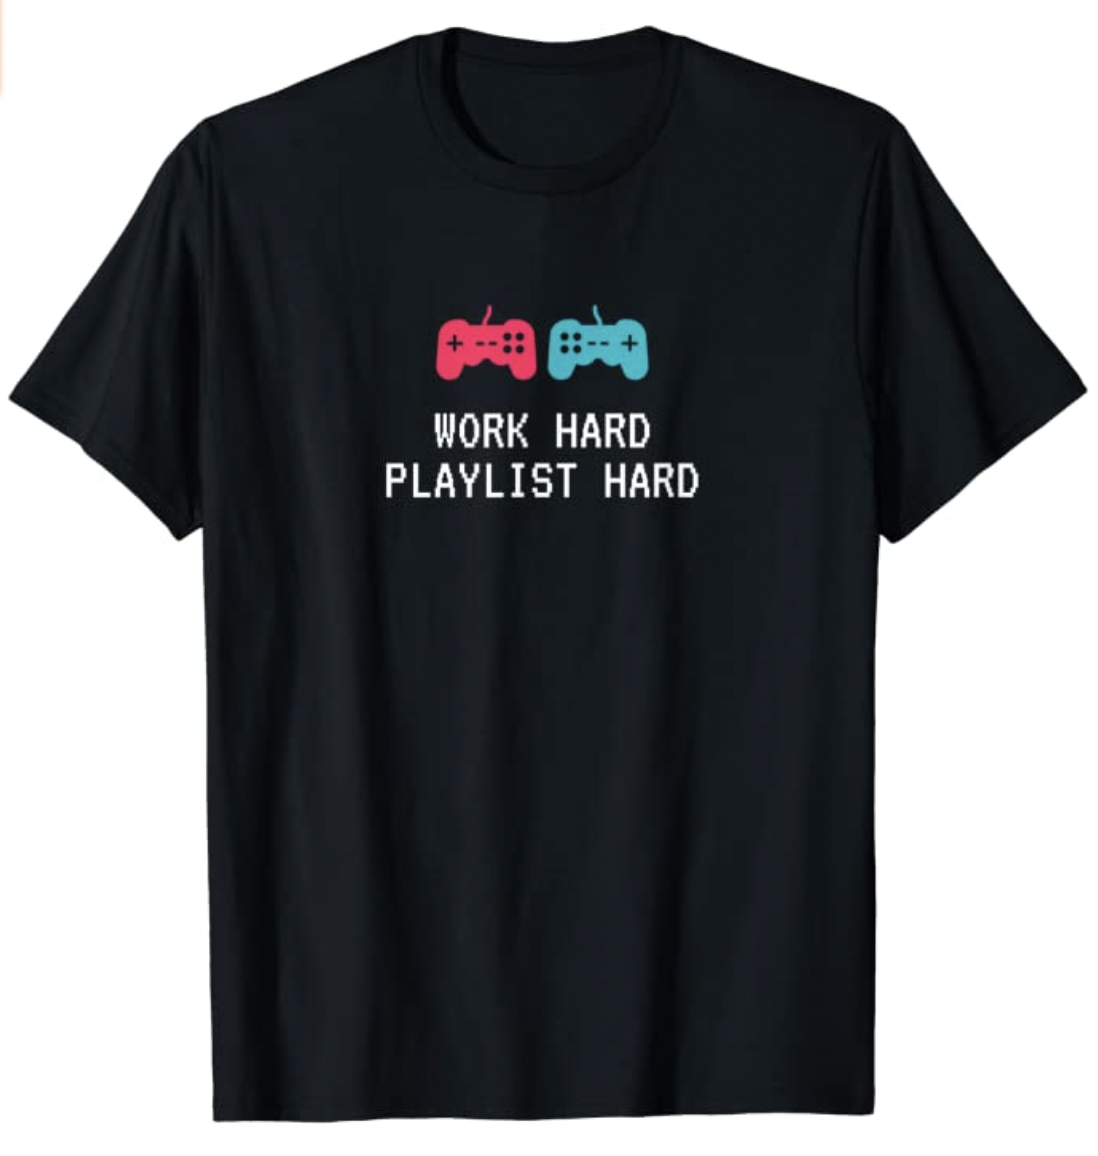 Work Hard Playlist Hard T-Shirt with Gaming Controllers